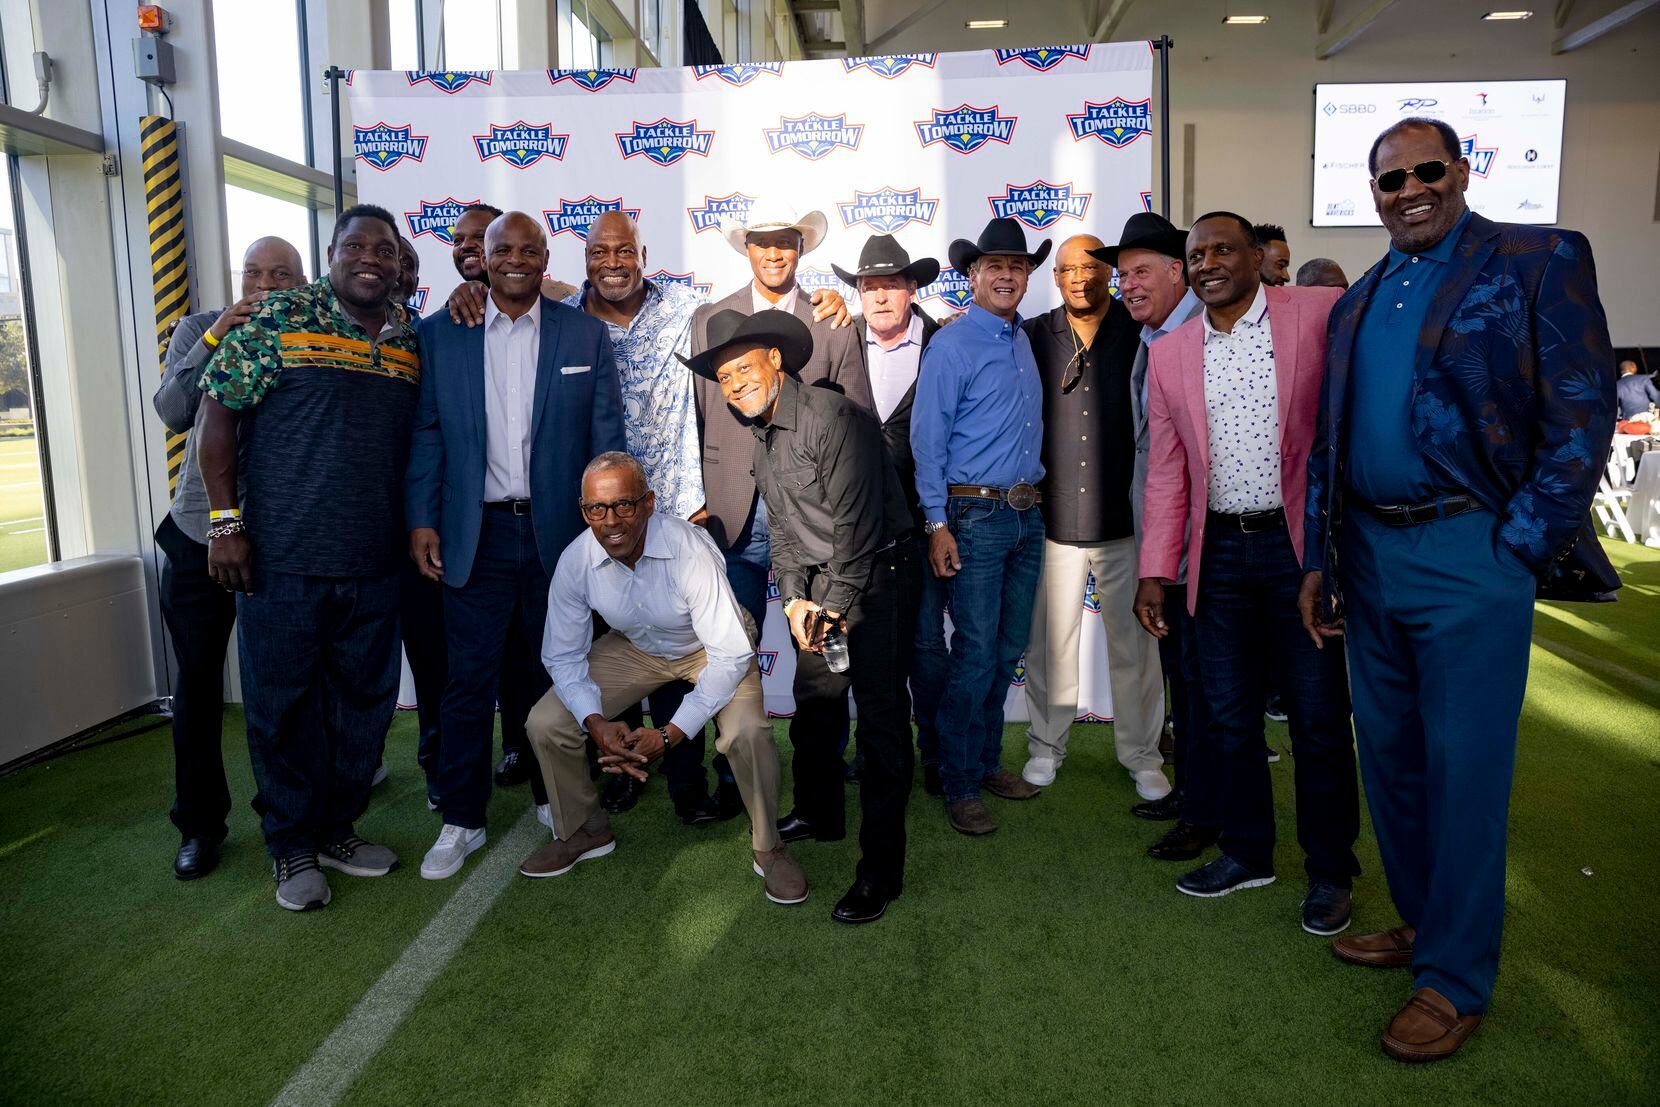 Pro Football Hall of Famer and former Dallas Cowboys player Charles Haley poses with legends...